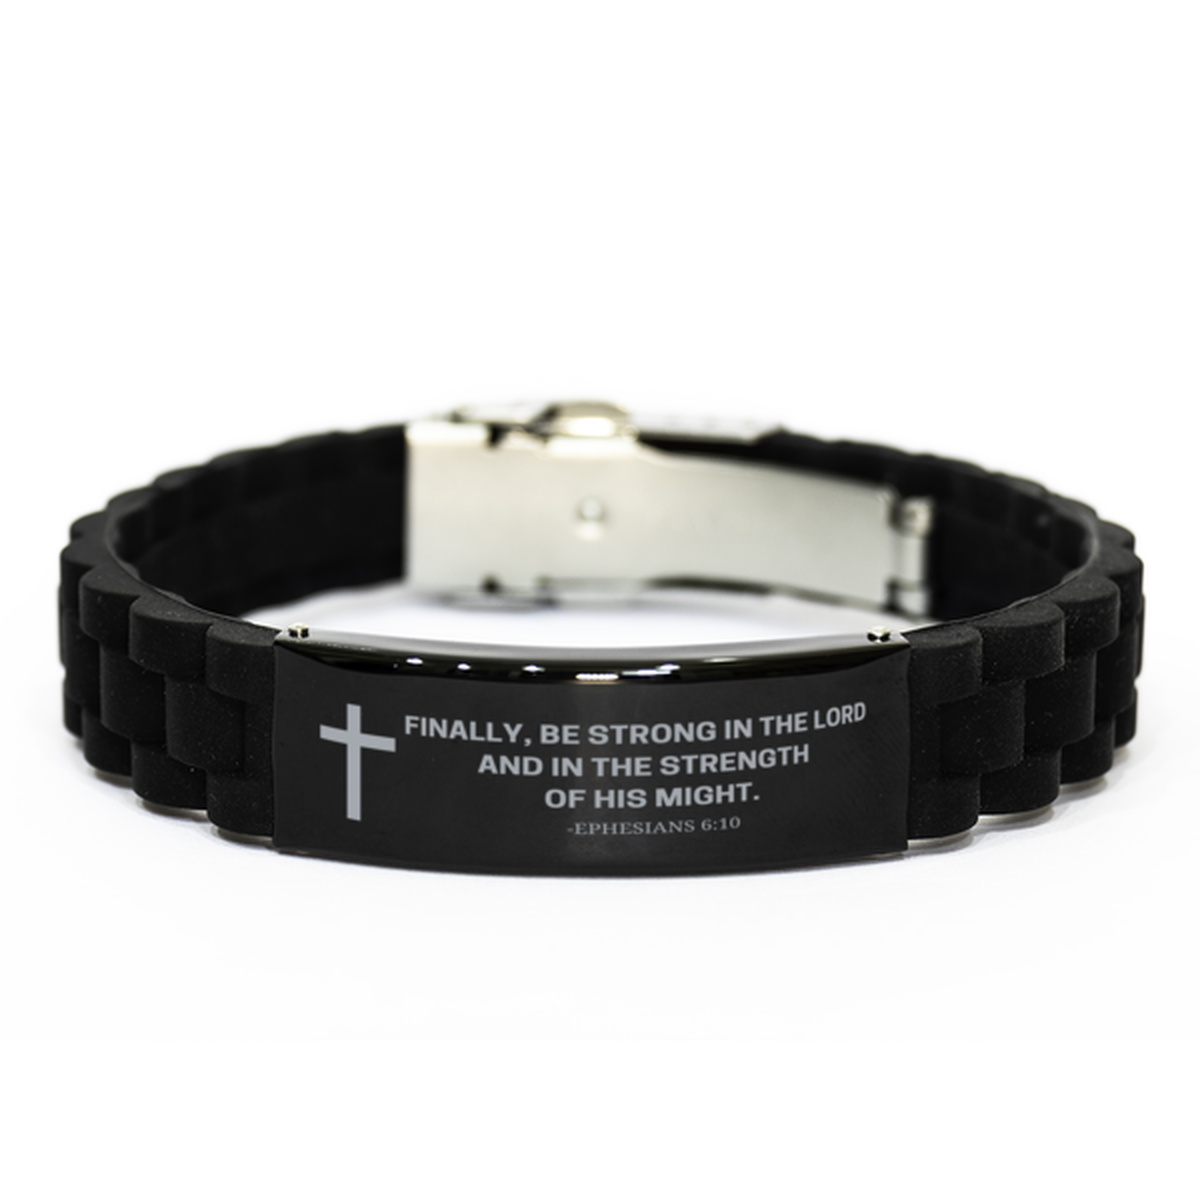 Baptism Gifts For Teenage Boys Girls, Christian Bible Verse Black Glidelock Clasp Bracelet, Finally, be strong in the Lord Catholic Confirmation Gifts for Son, Godson, Grandson, Nephew